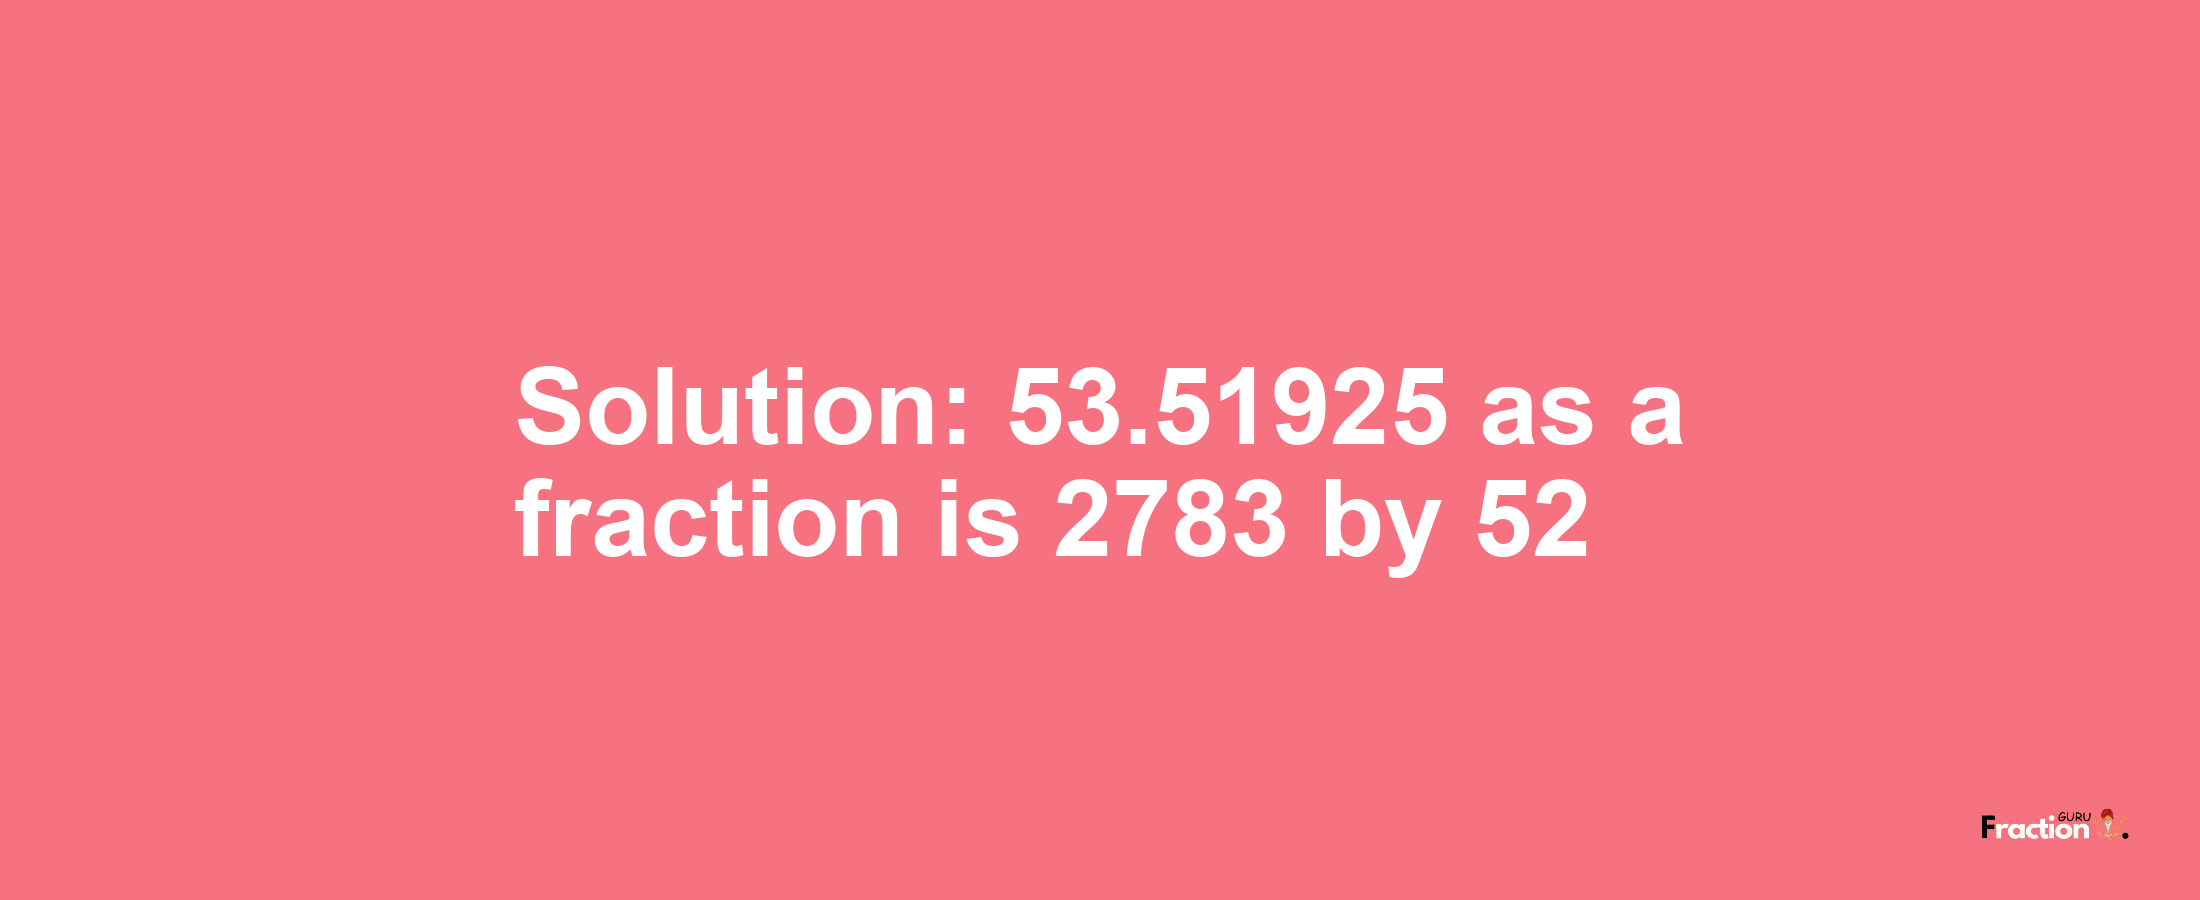 Solution:53.51925 as a fraction is 2783/52